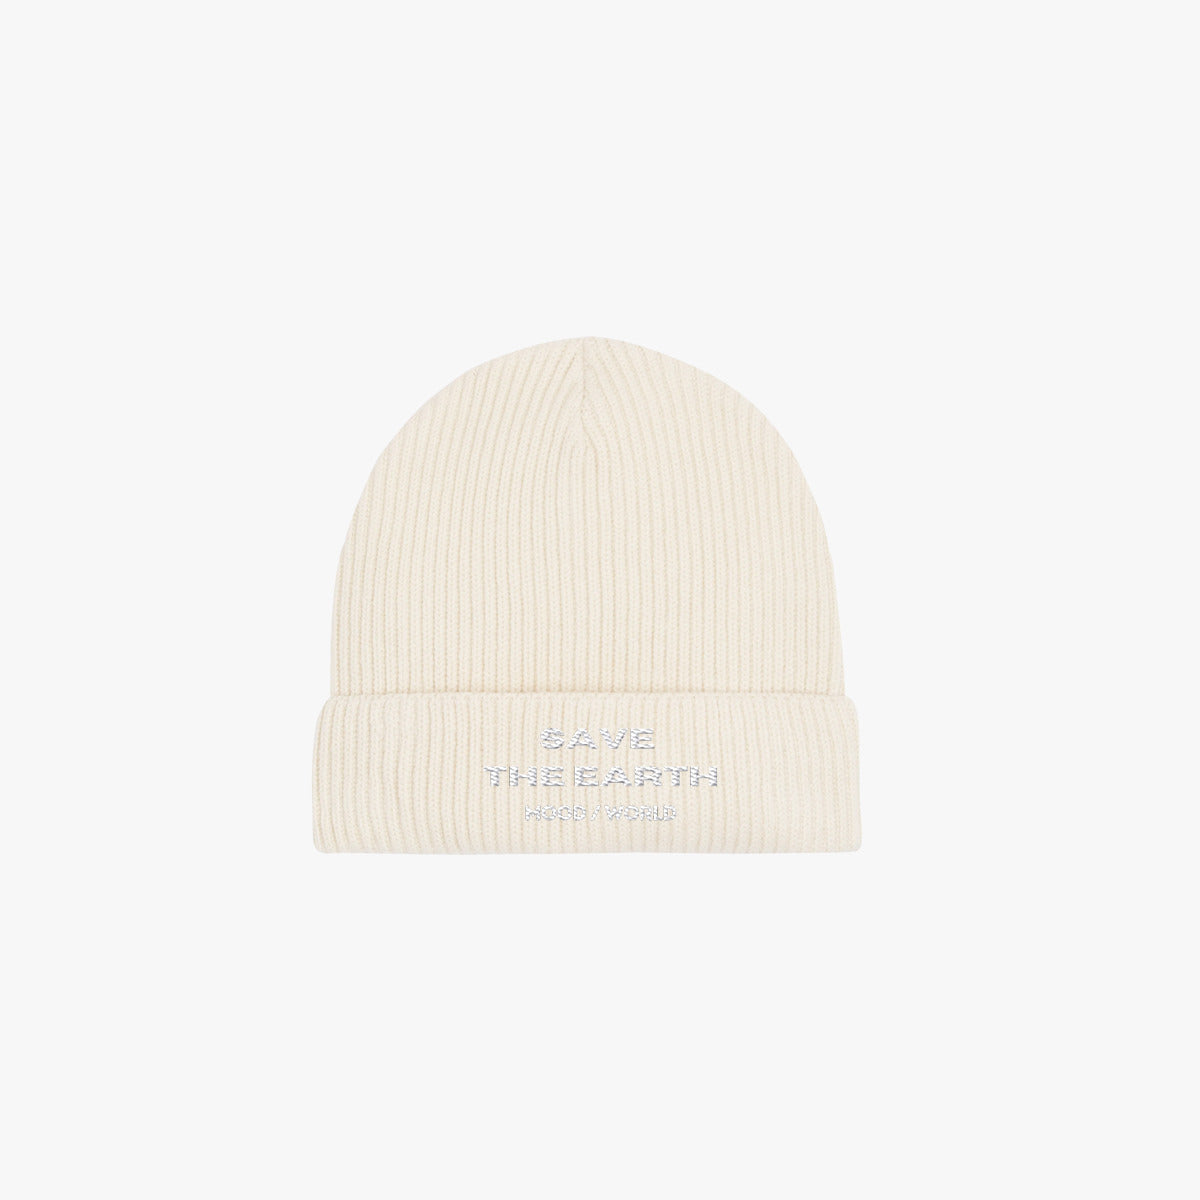 'SAVE THE EARTH' Organic Fisherman Beanie in der Farbe Natural